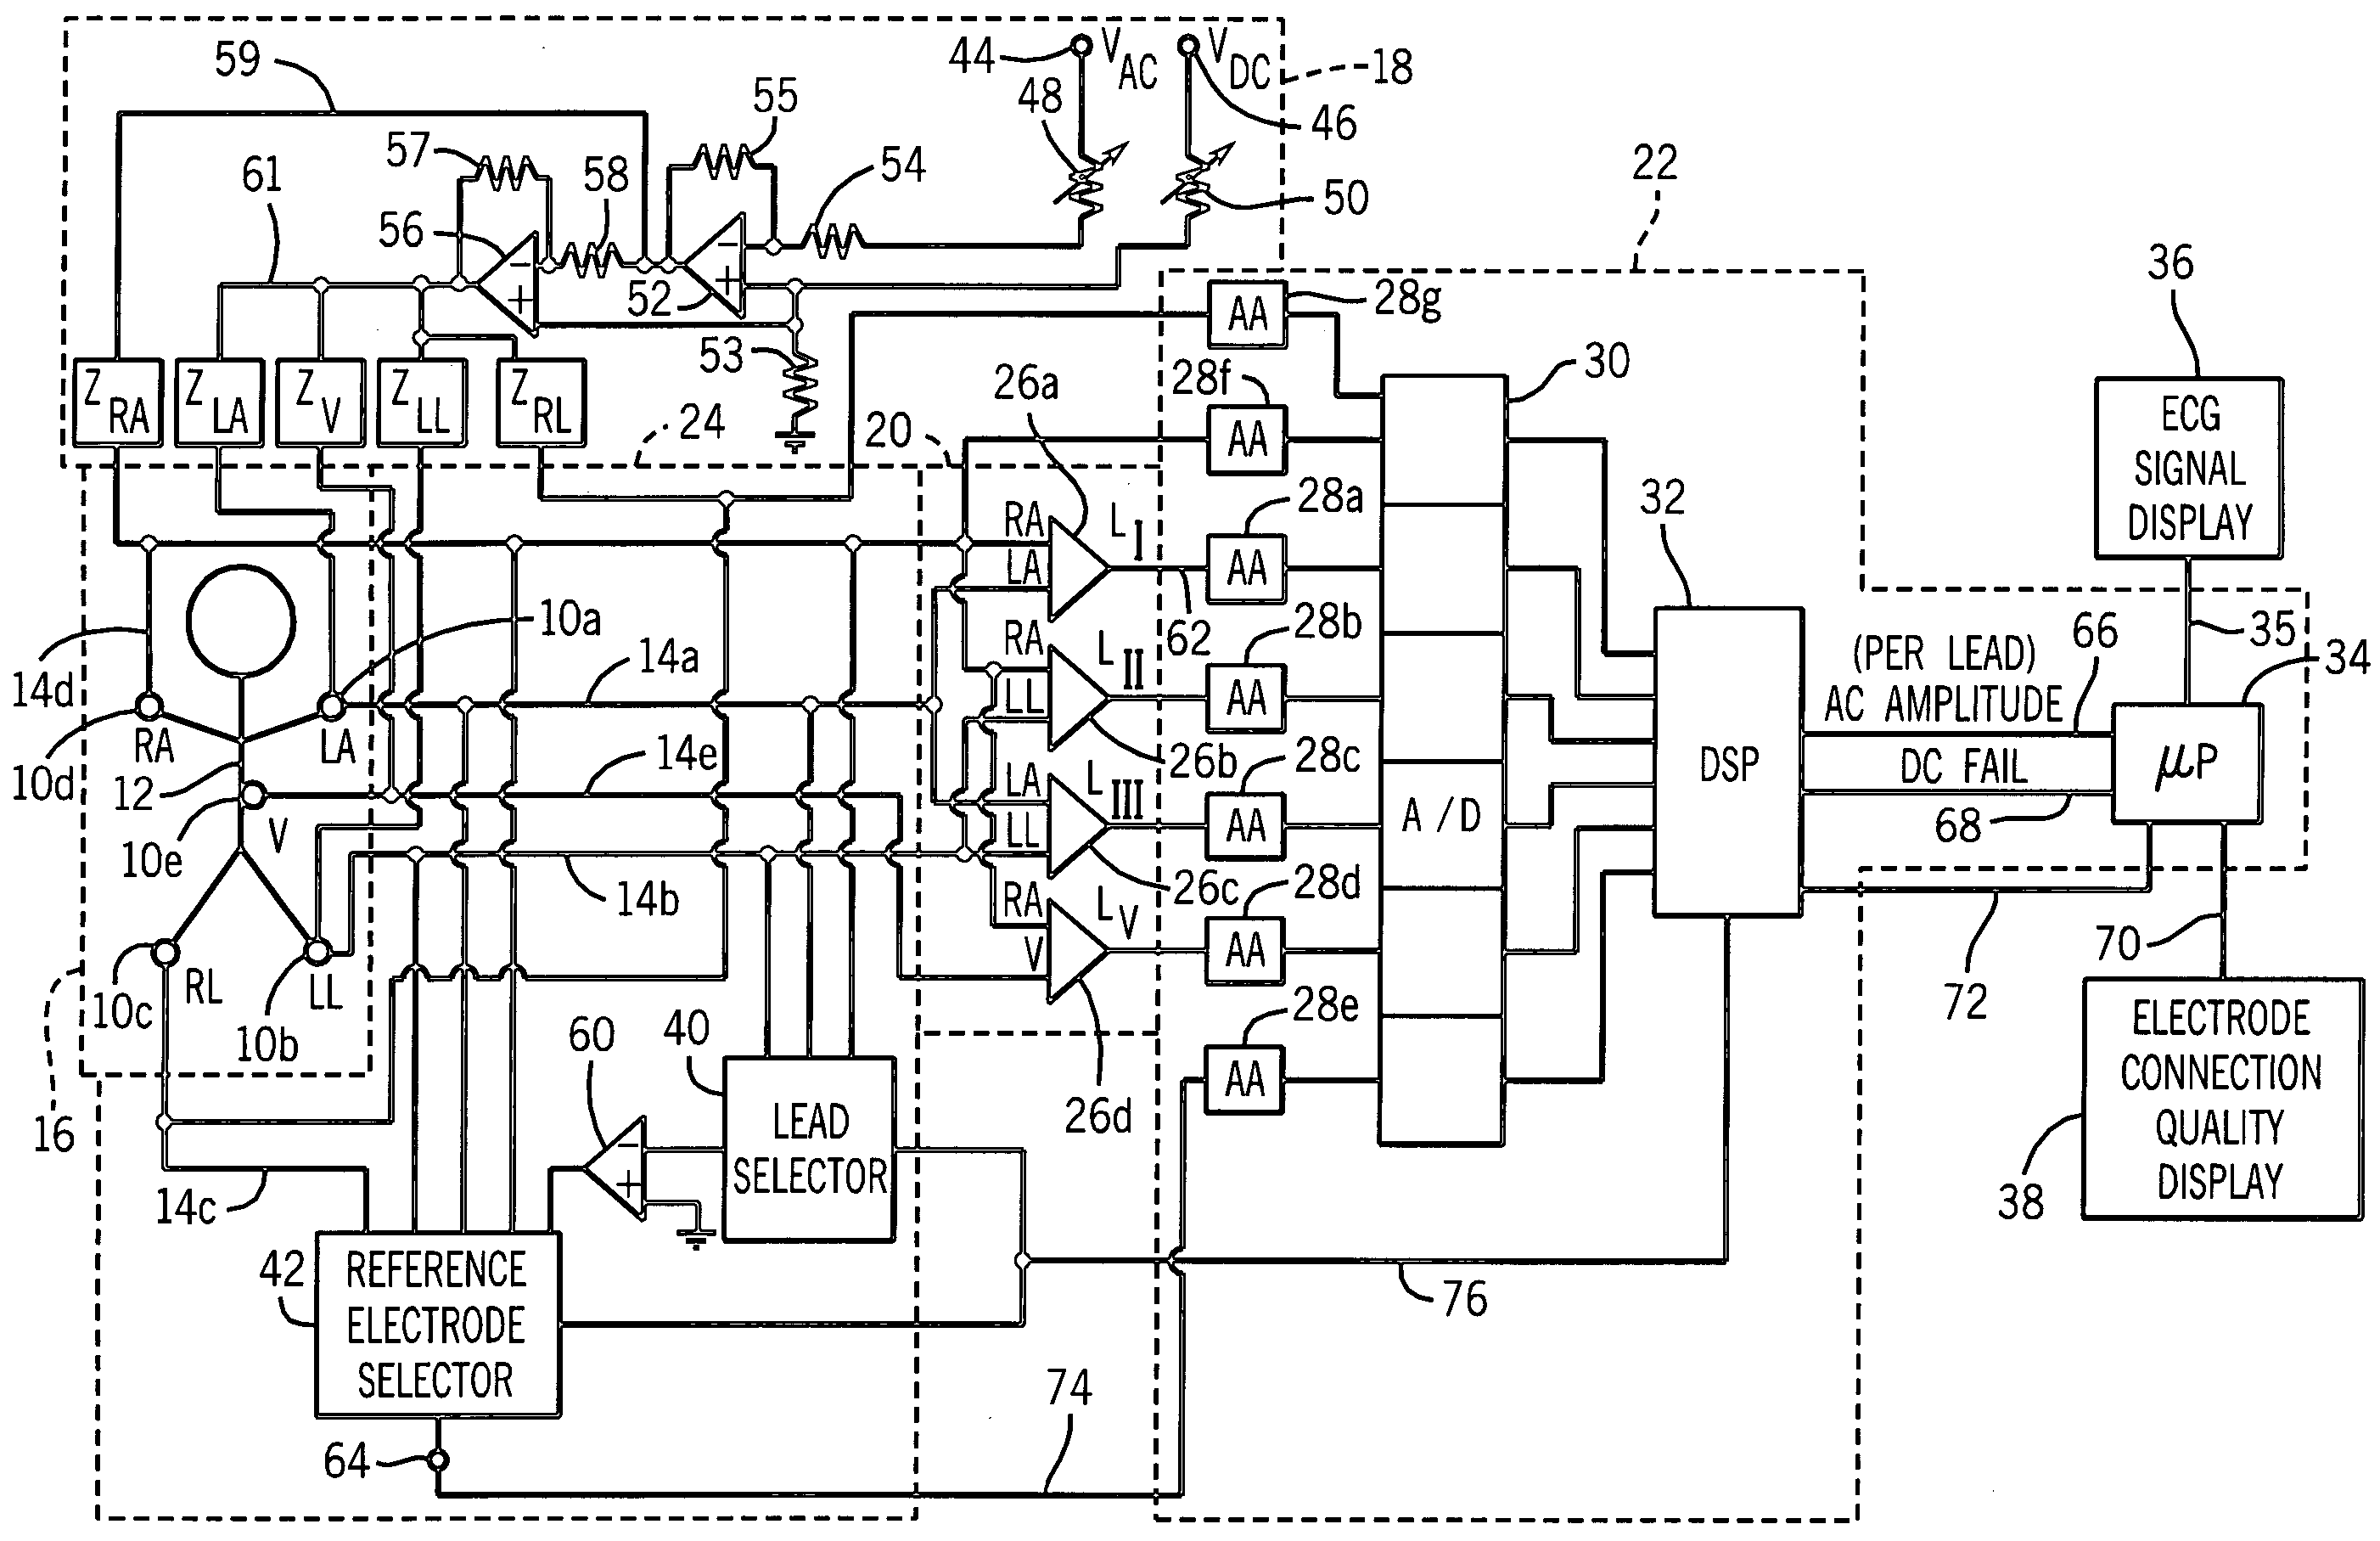 Impedance measurement apparatus for assessment of biomedical electrode interface quality